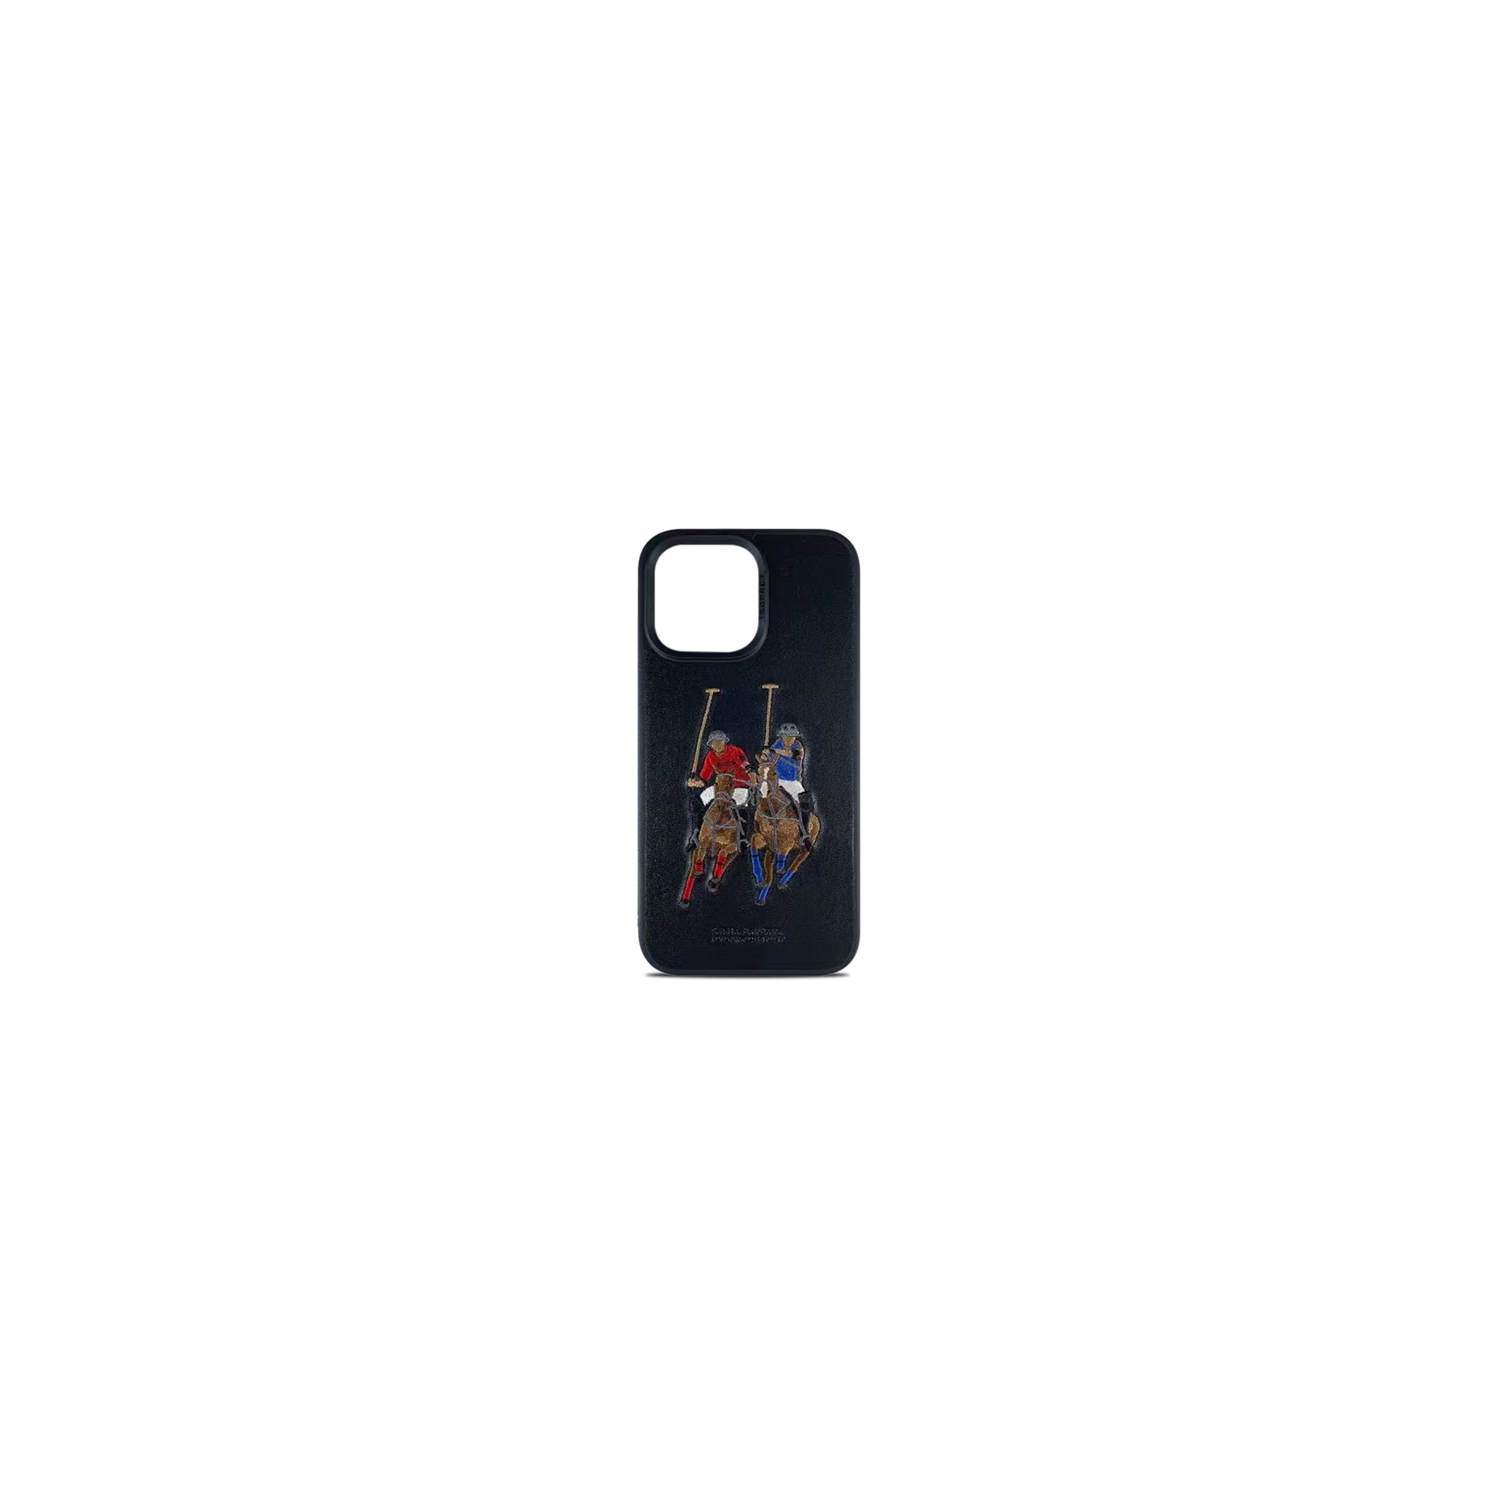 Santa Barbara Jockey Series 3D Embroidered Black Polo Leather Case for iPhone 14 Pro